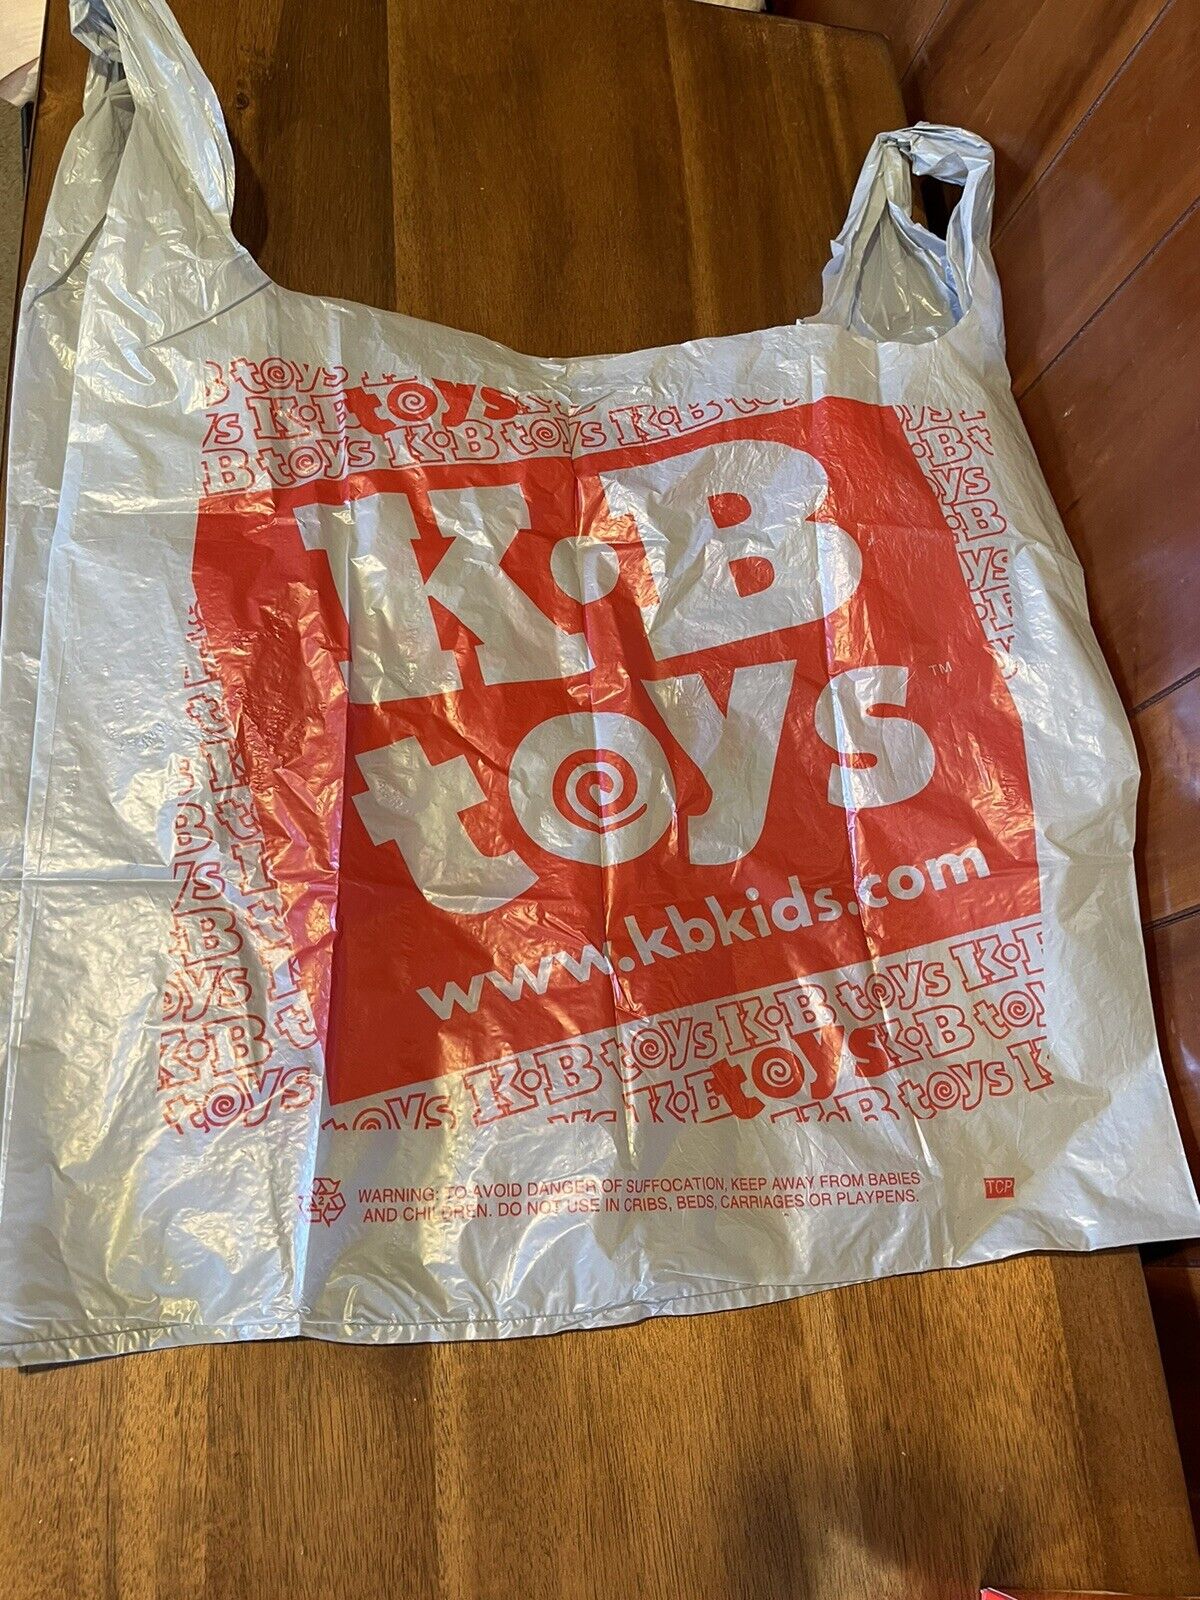 KB Toys plastic bag vintage toy store large gray 24 inches long